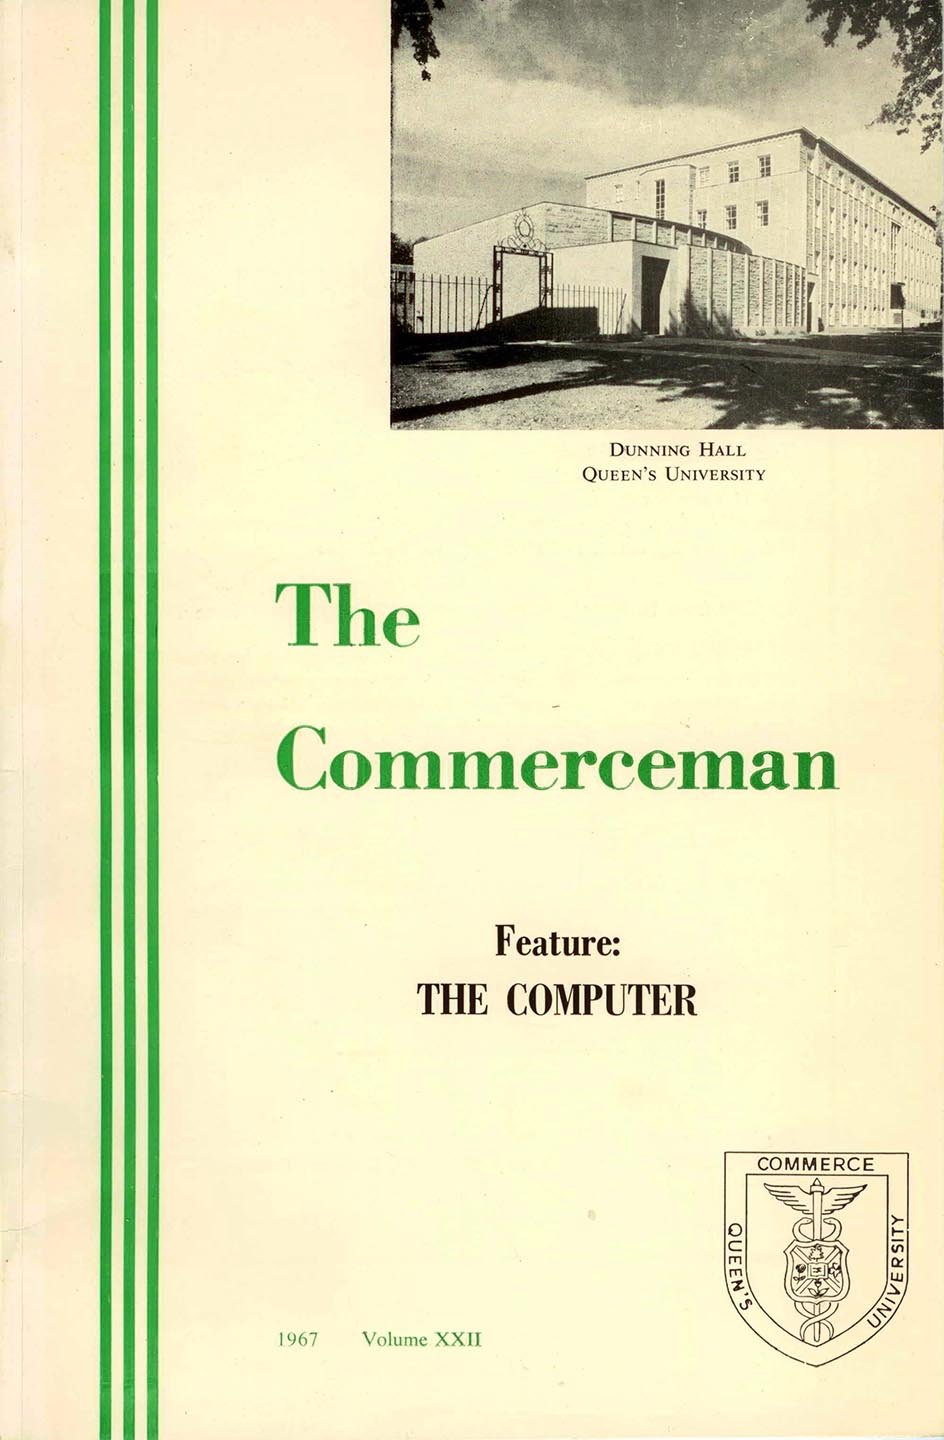 The Commerceman Volume XXII 1967. Feature: The Computer